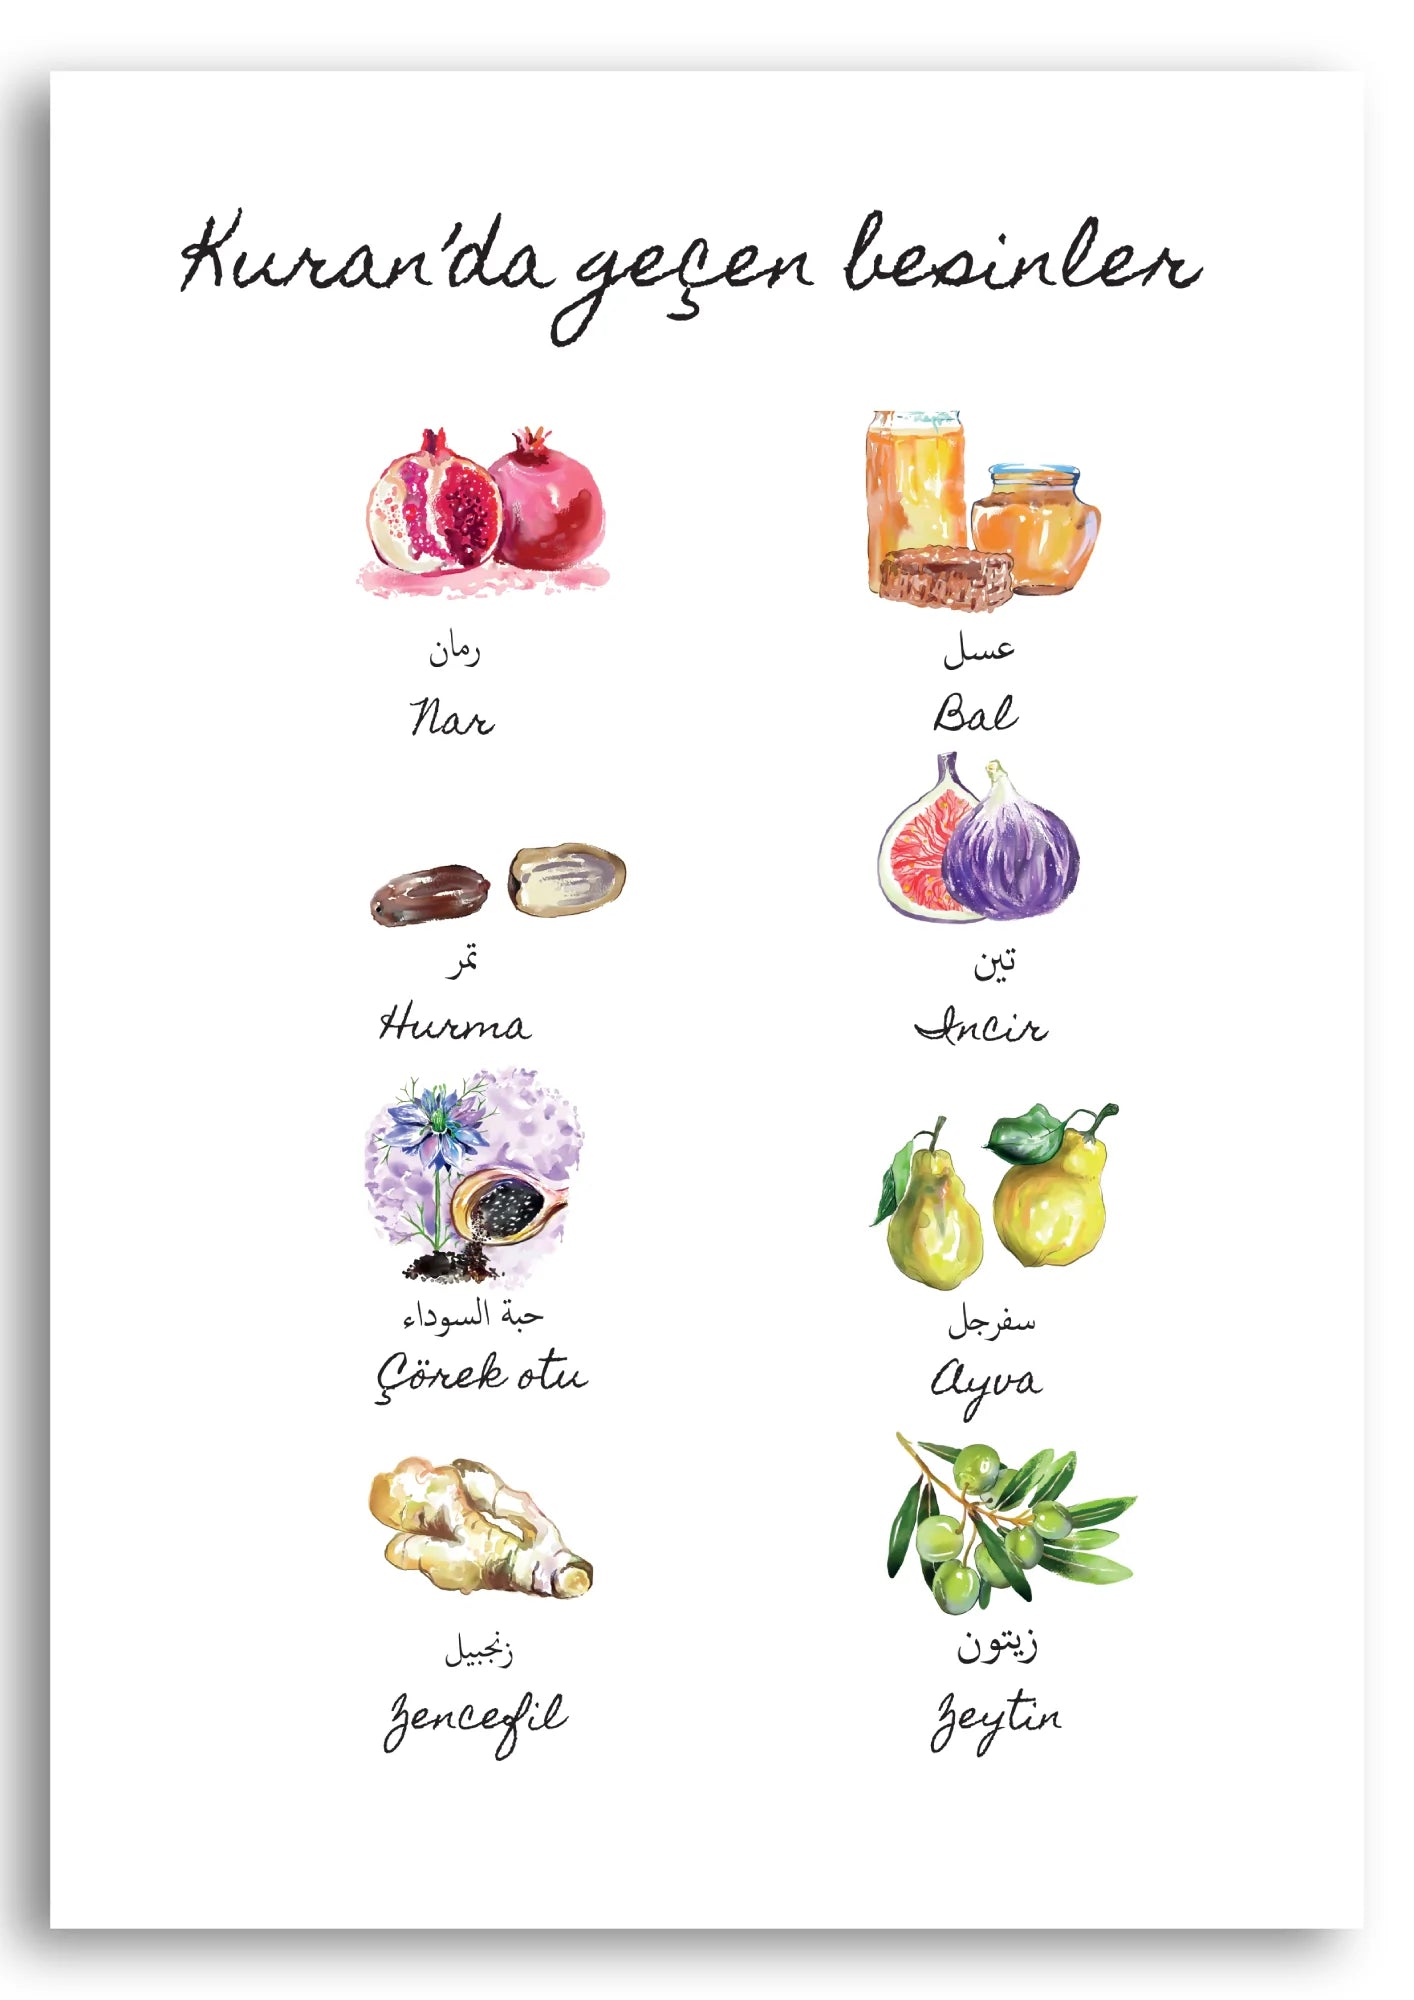 Food in the Qur'an - Portrait